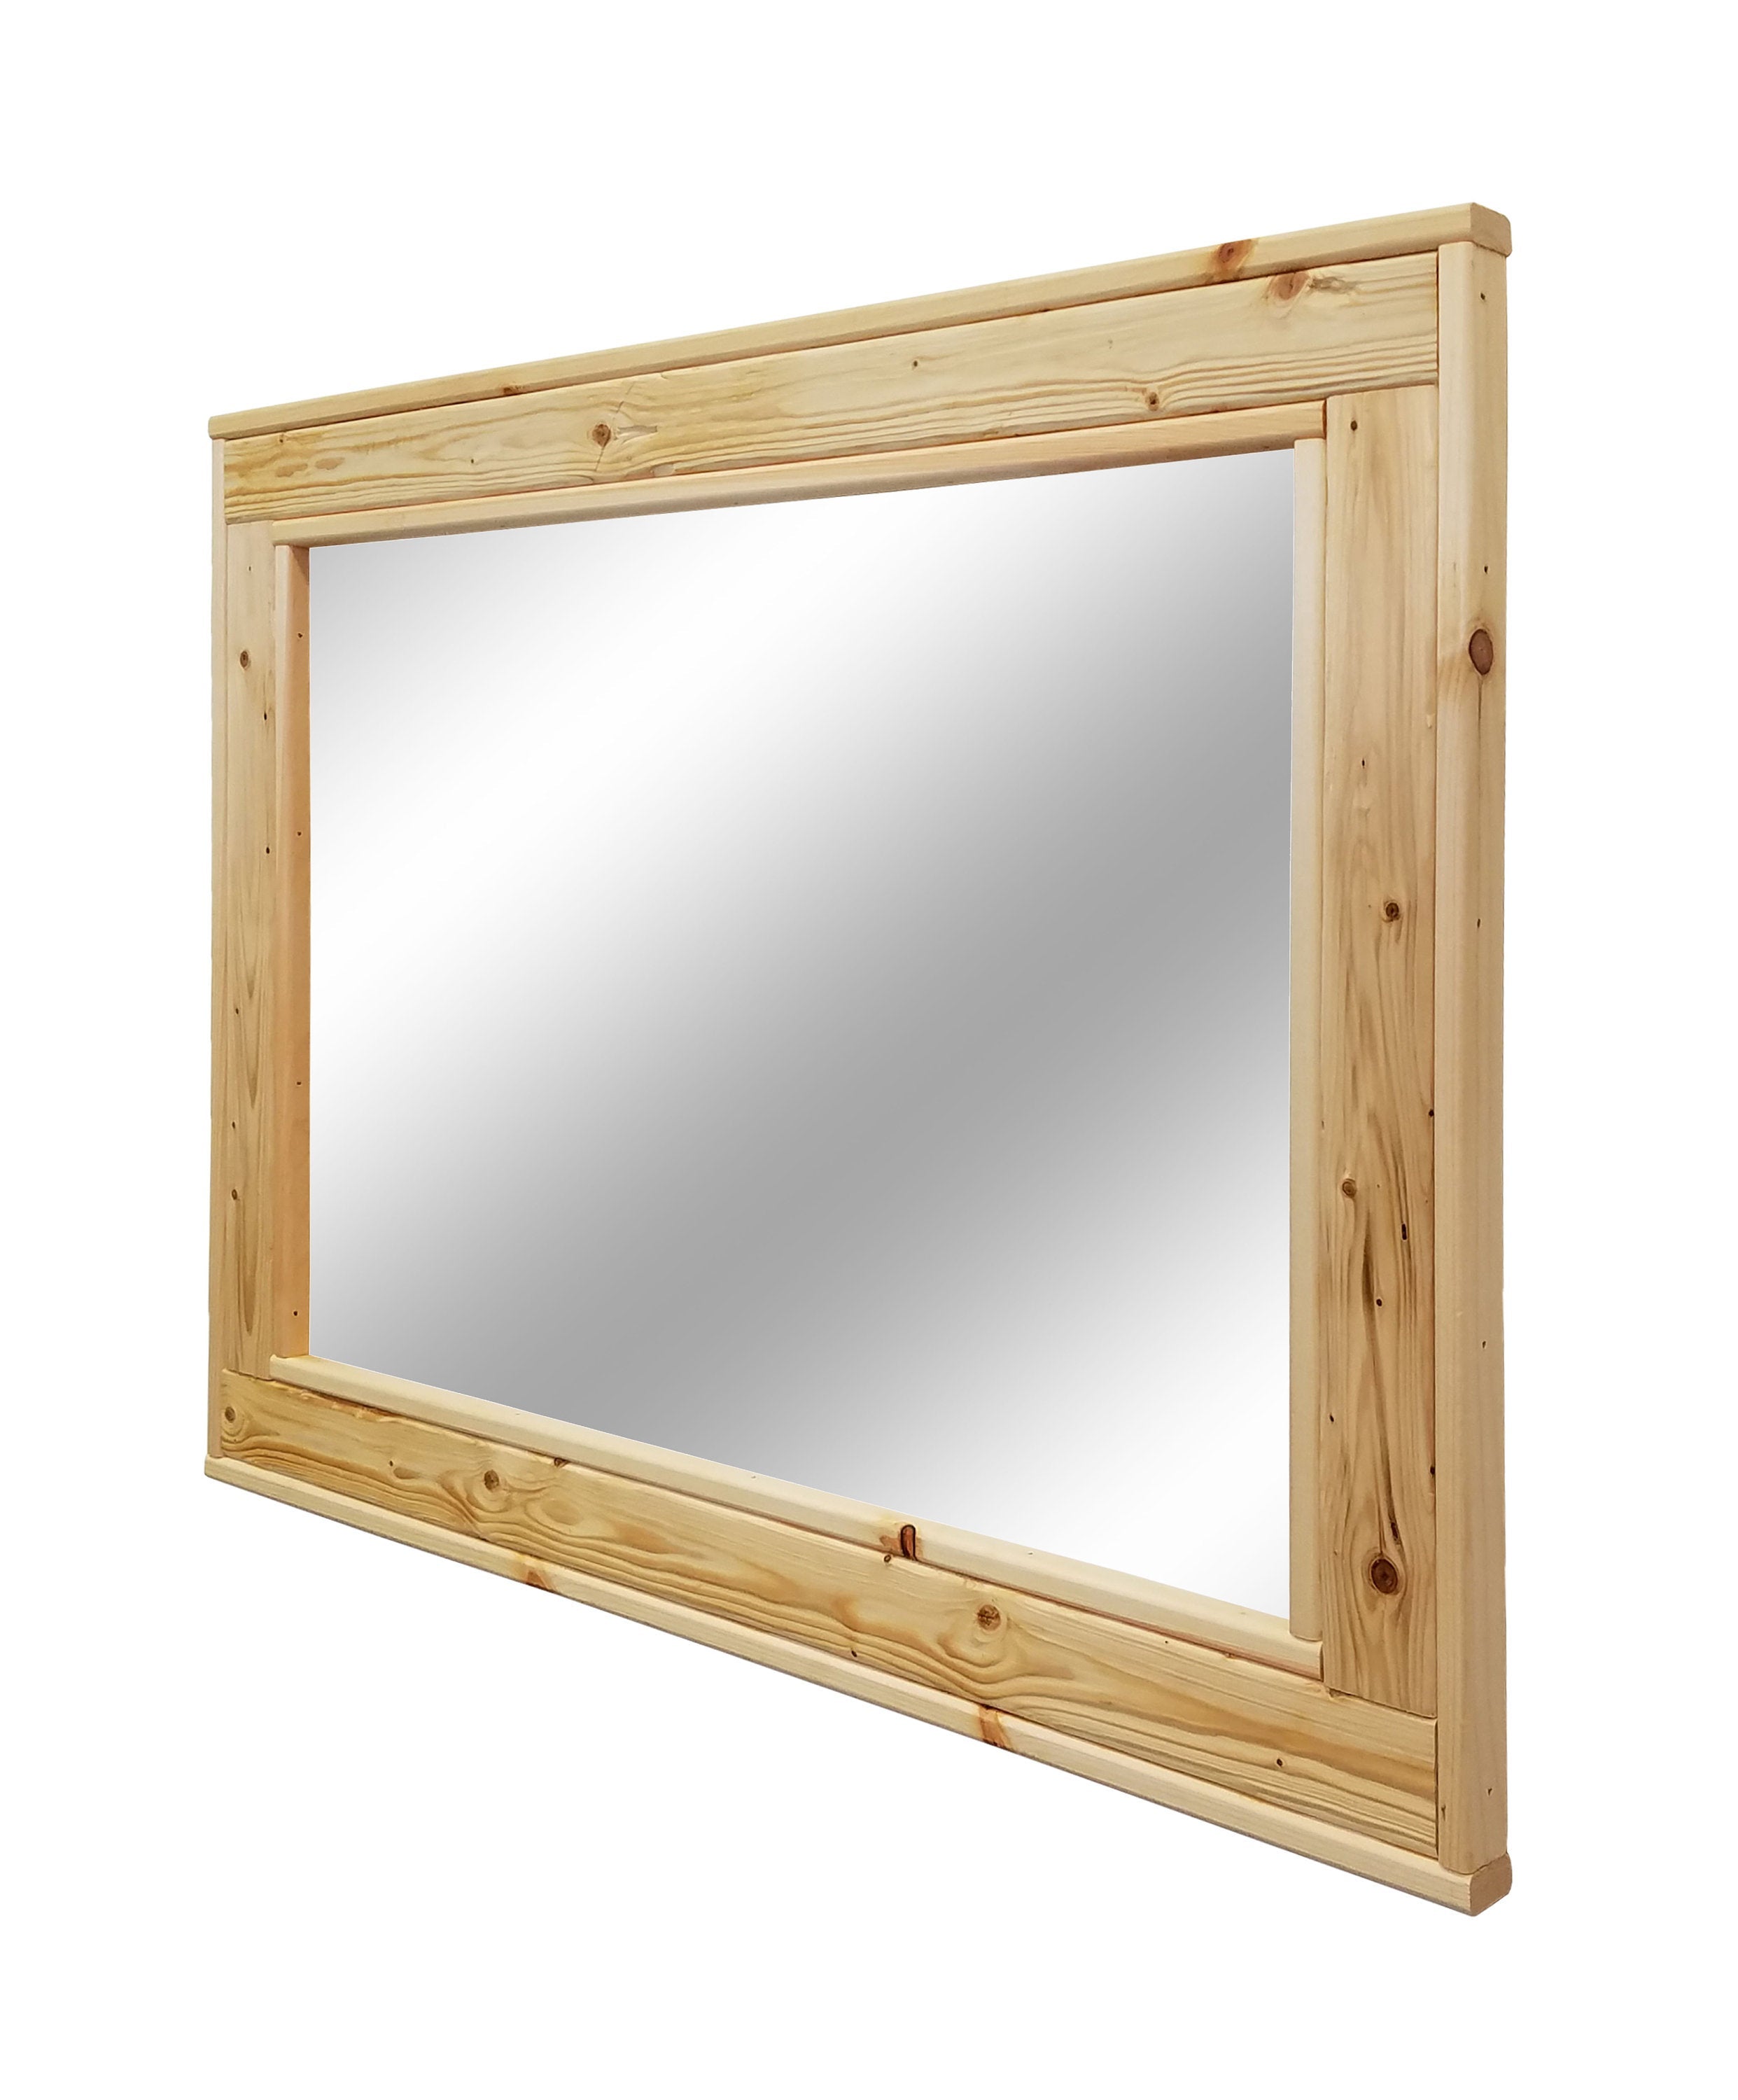 Herringbone Reclaimed Styled Wood Mirror, 20 Stain Colors & Custom Sizes, Shown in New Natural